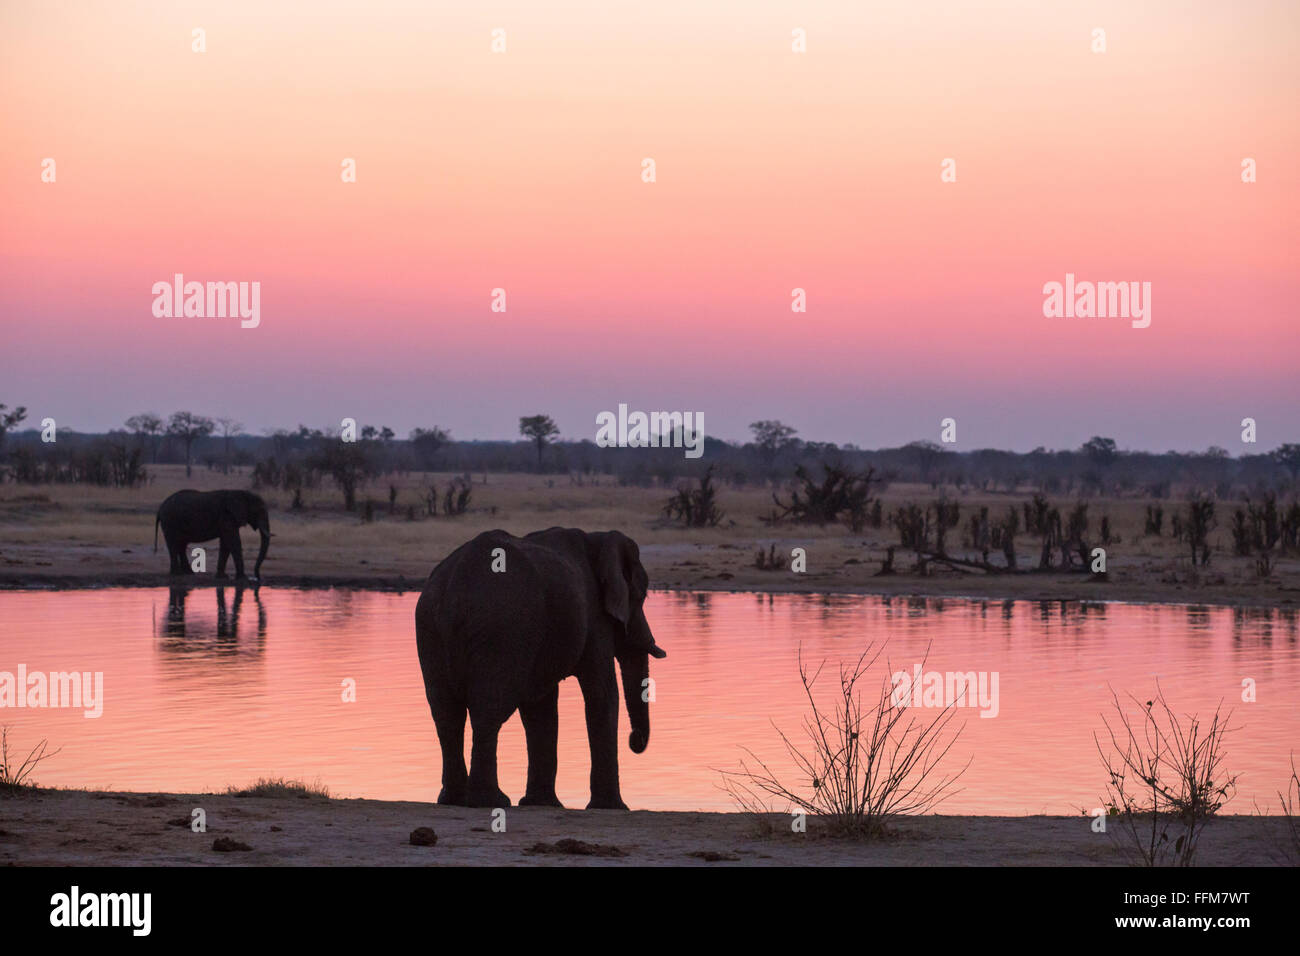 Elephants at a pan with a moody sunset sky reflected in hte water Stock Photo